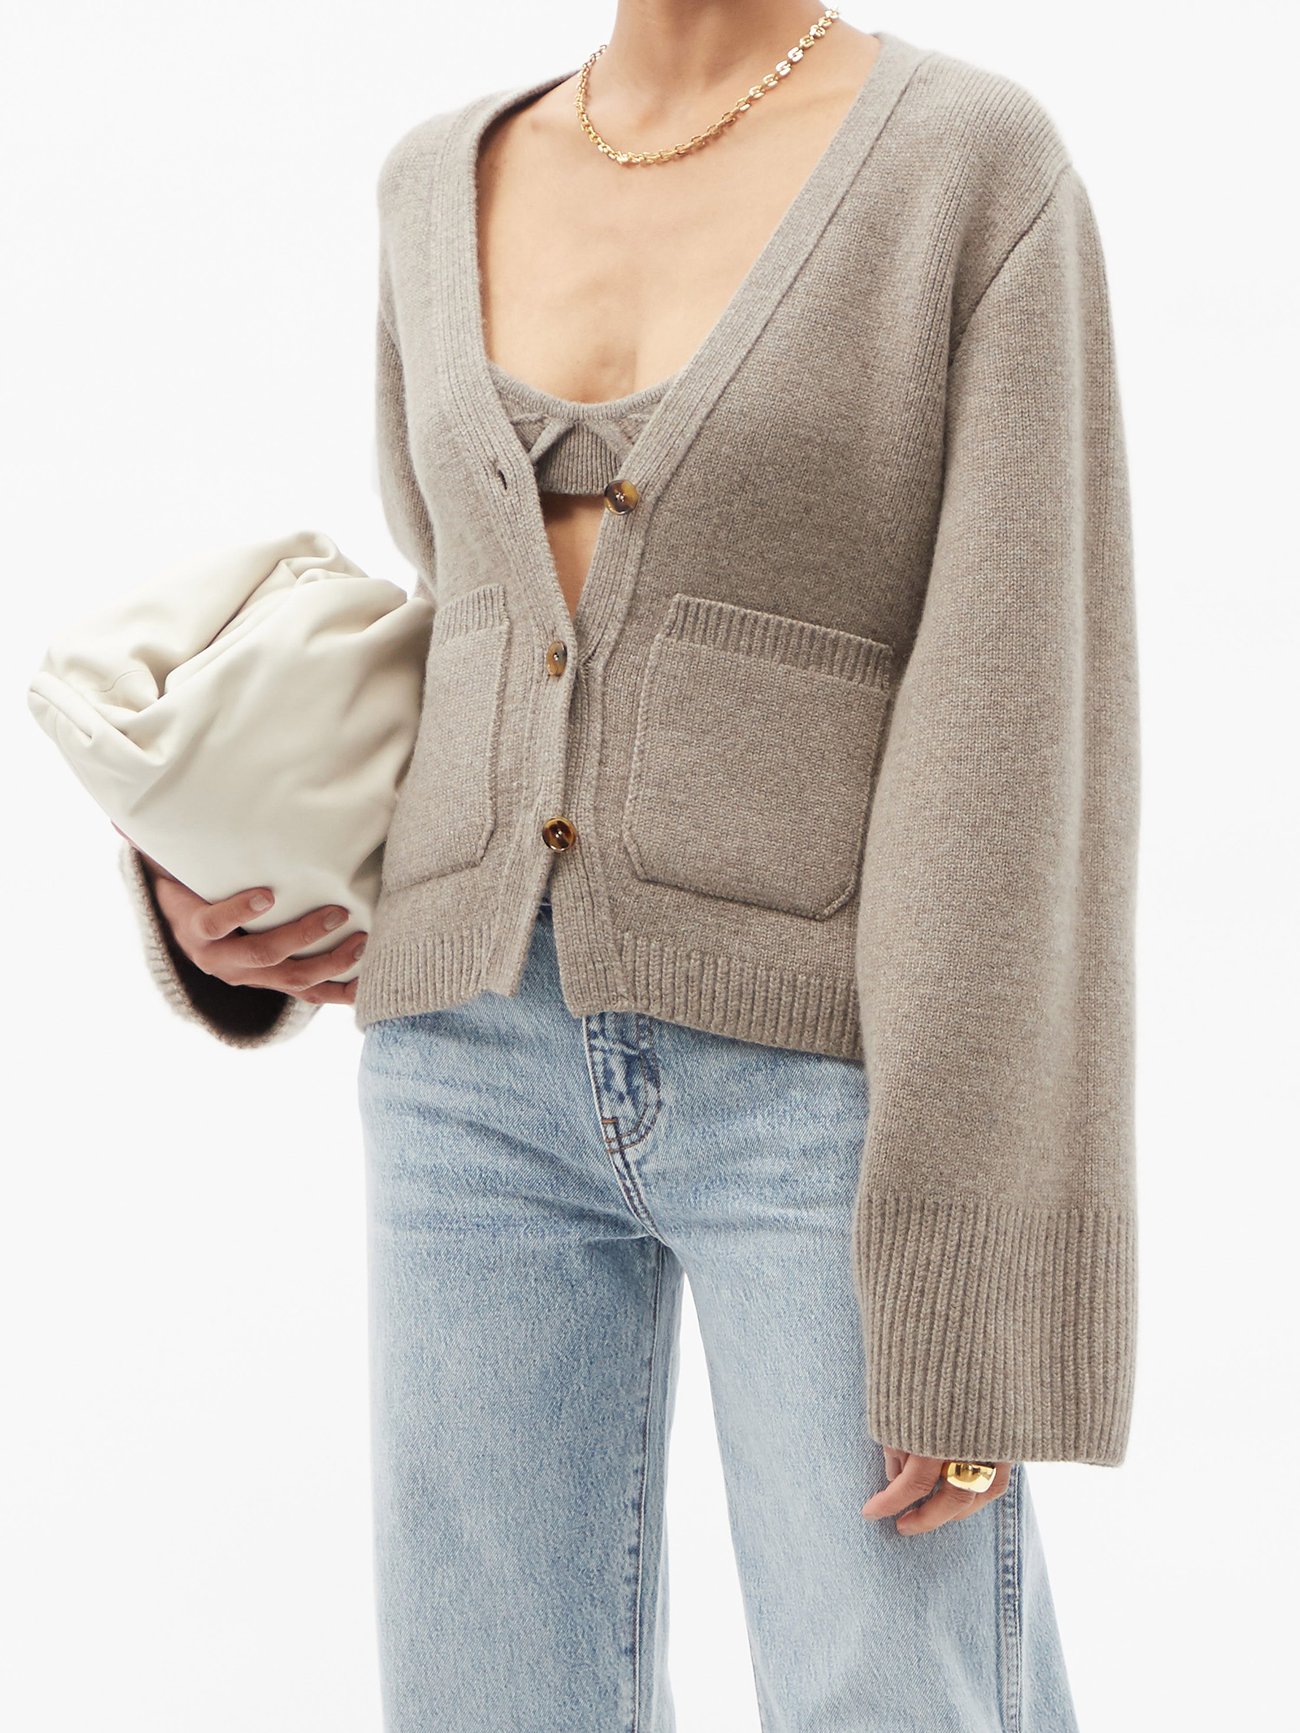 The 15 Best Cardigans to Buy in 2022, Hands Down | Who What Wear